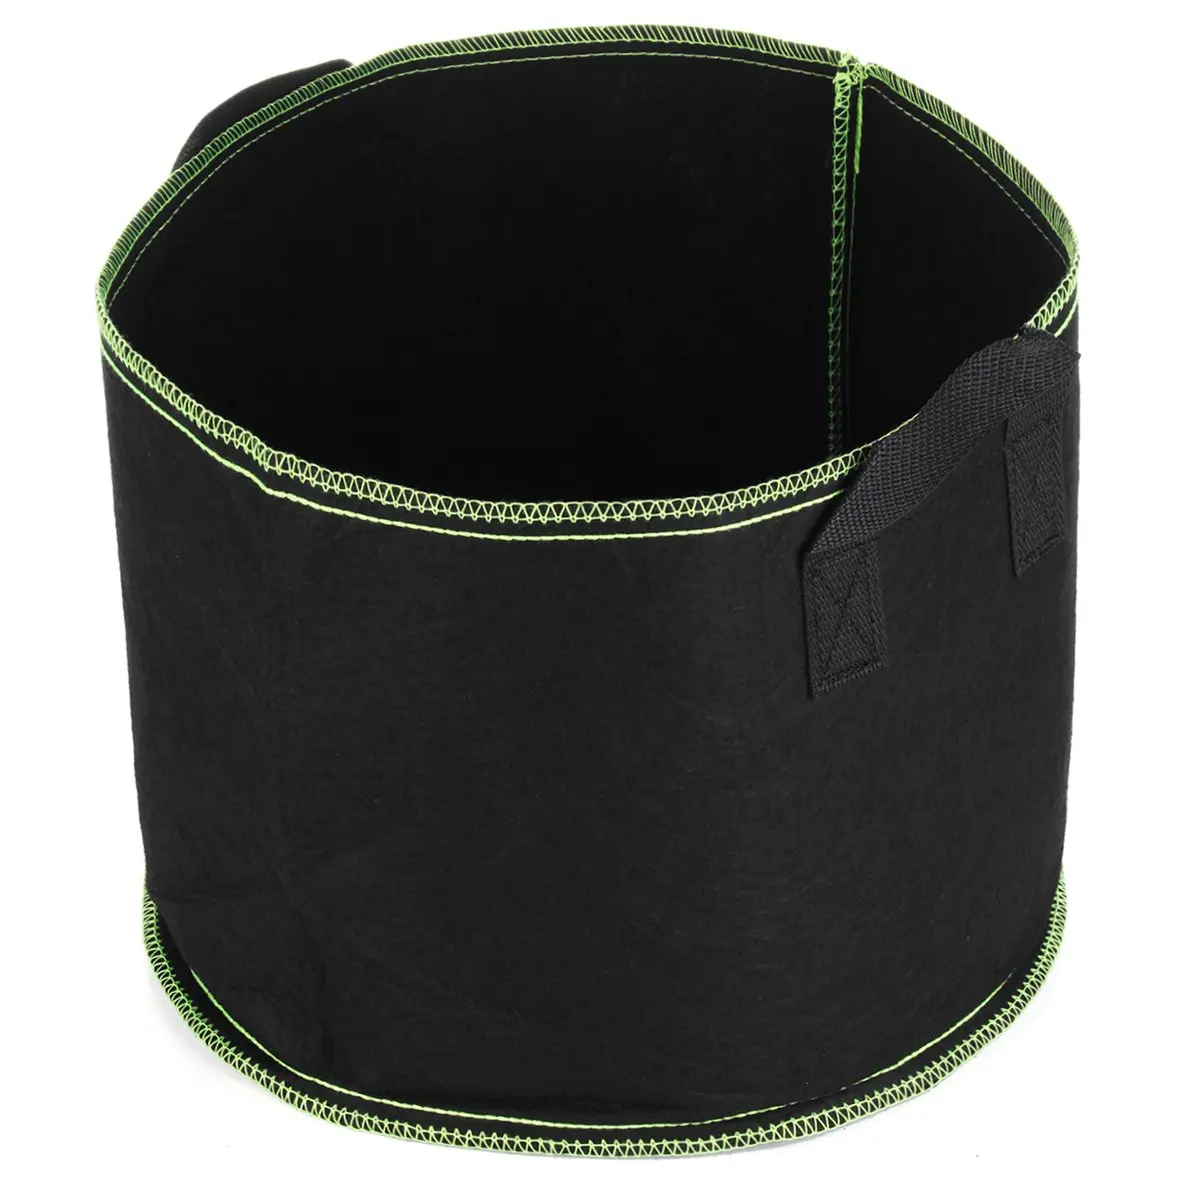 

3.5.7.10 gallon Felt Grow Bag , Aeration Fabric Pots with Handles for Vegetables Peanuts Flowers, Black or customized